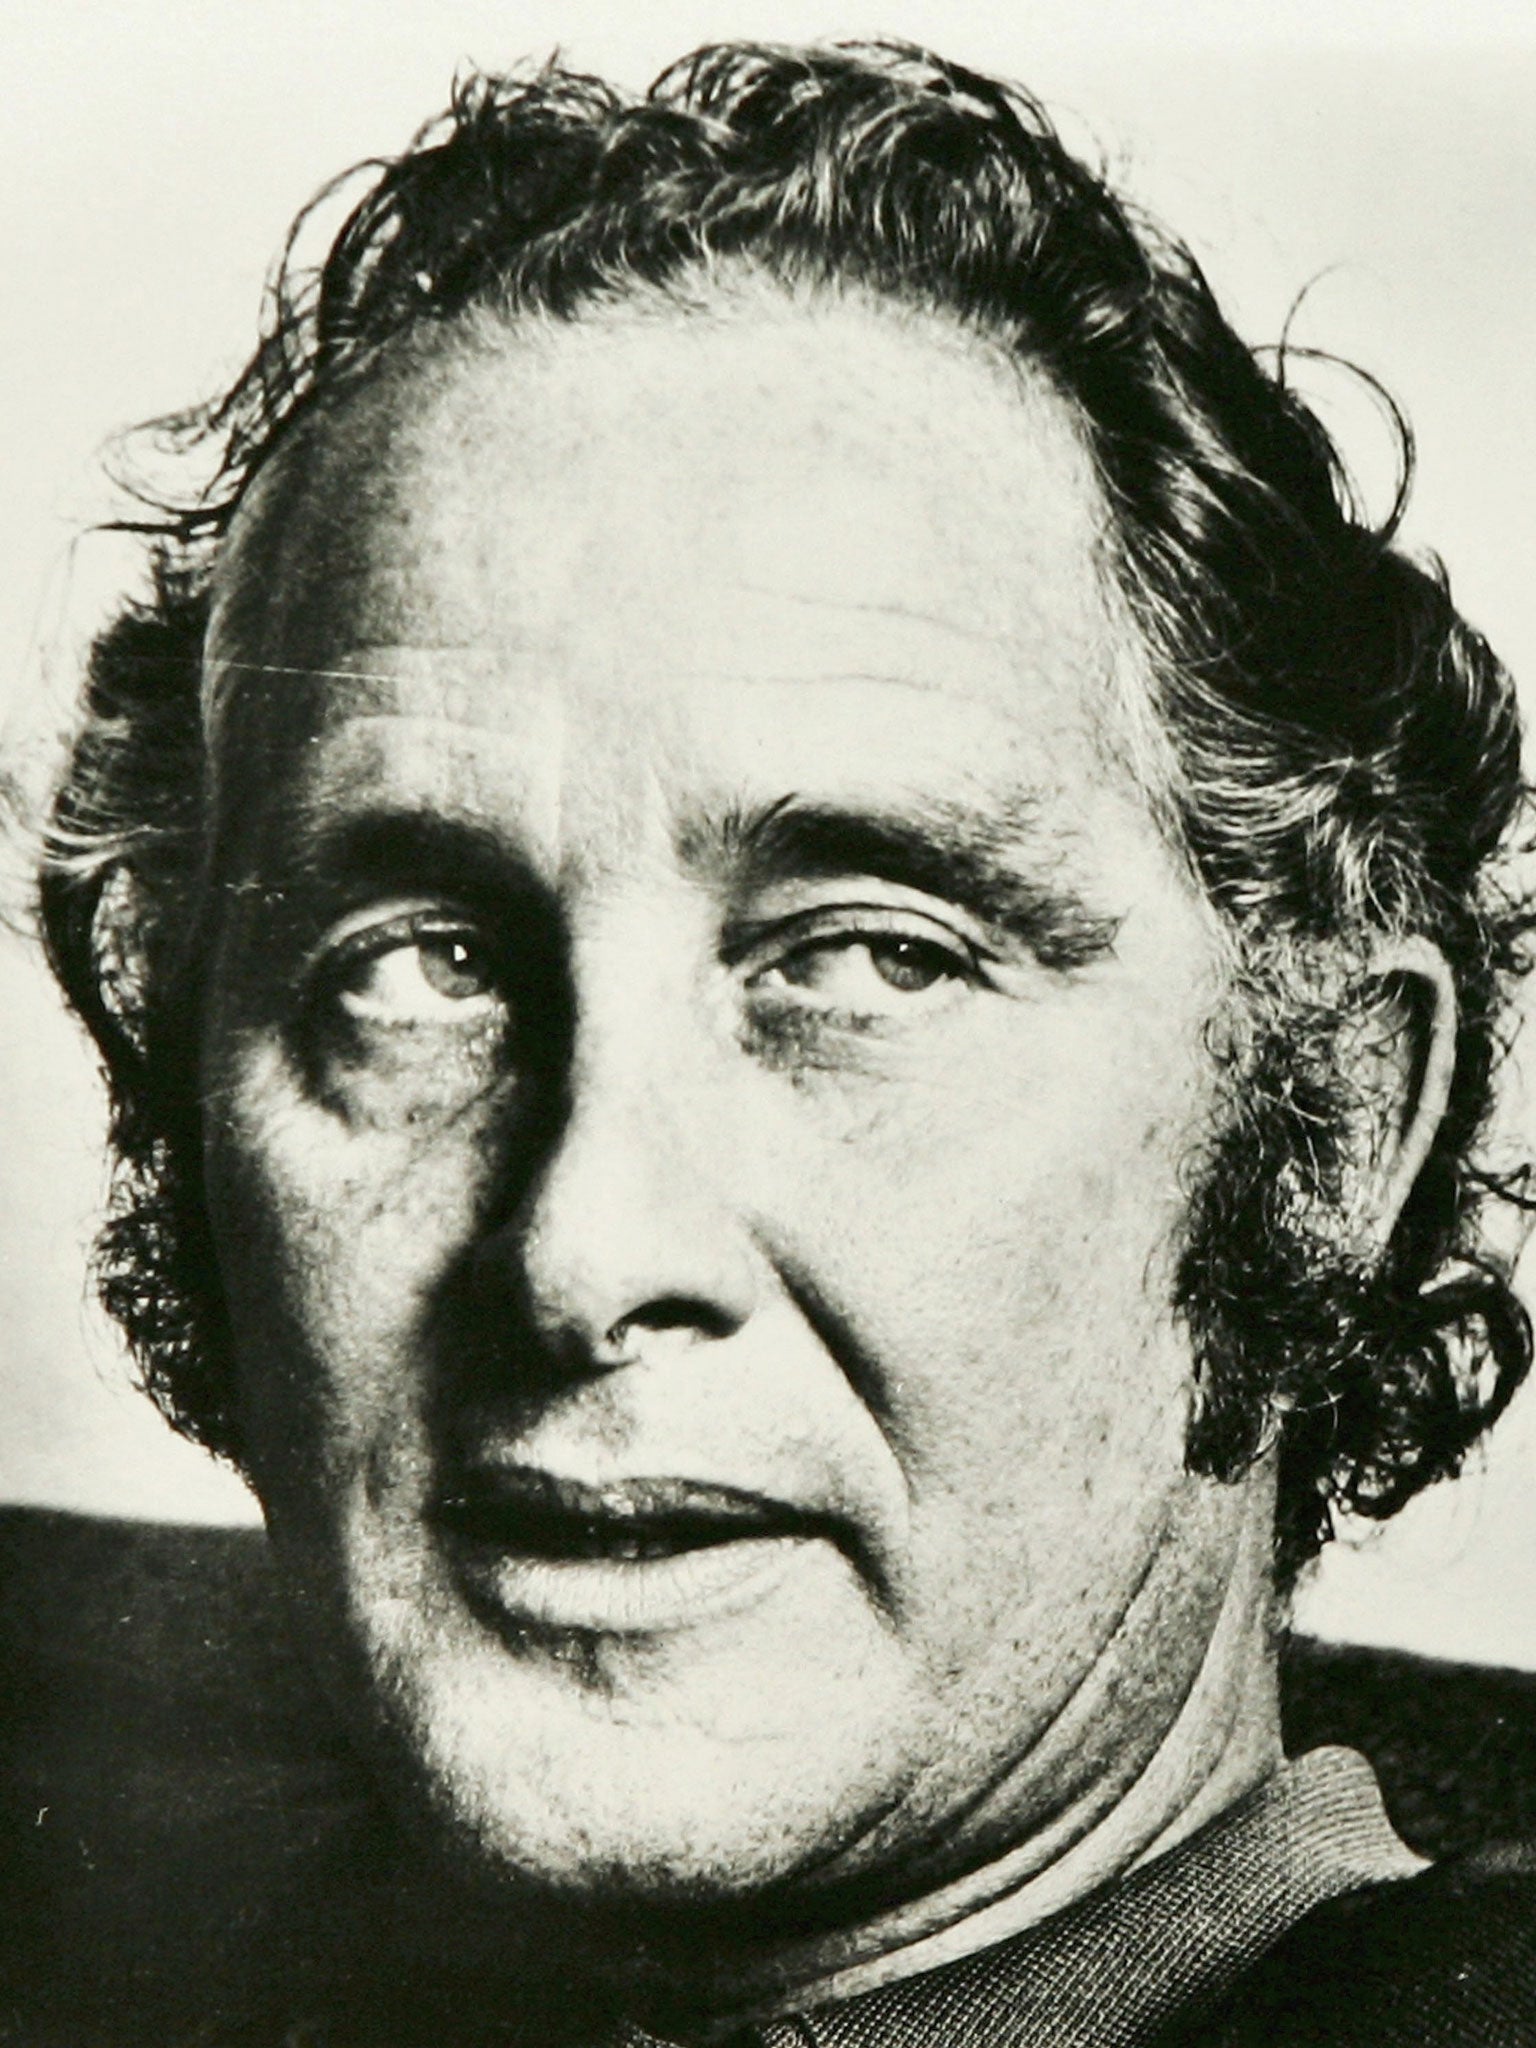 Ronnie Biggs was born in August. A new report says that children born at the start of the school year in September fare better in exams than those born in August